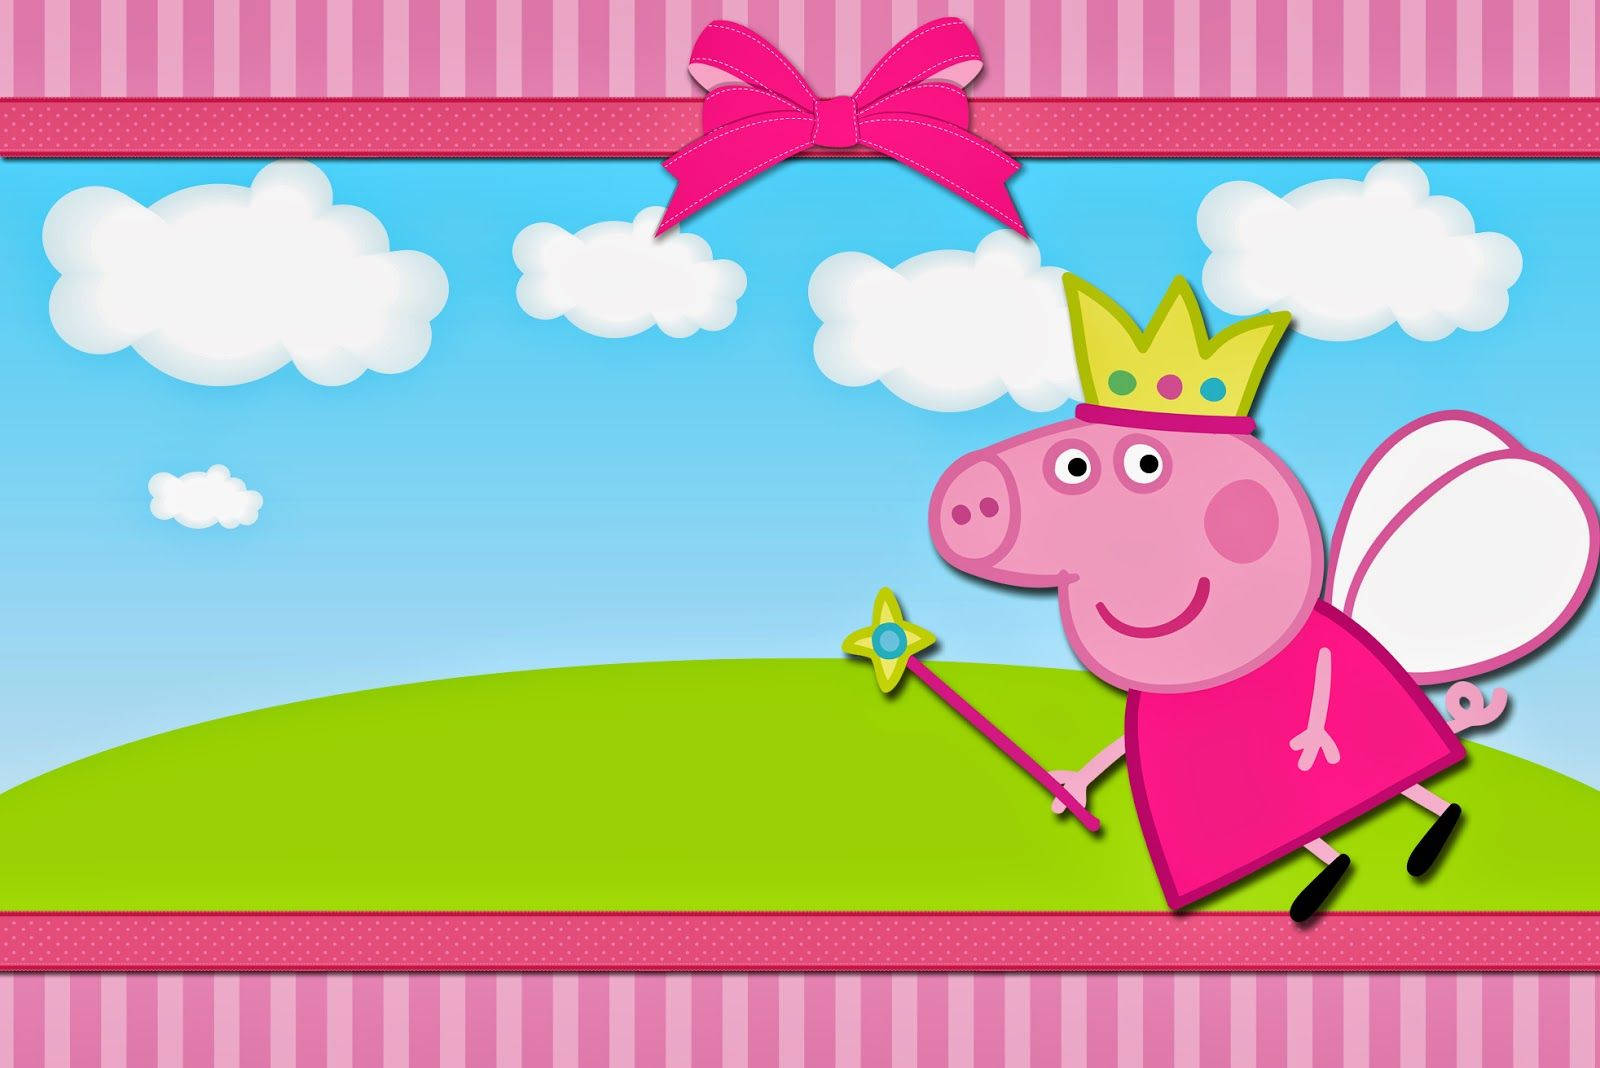 Peppa Pig in fairy outfit wallpaper.